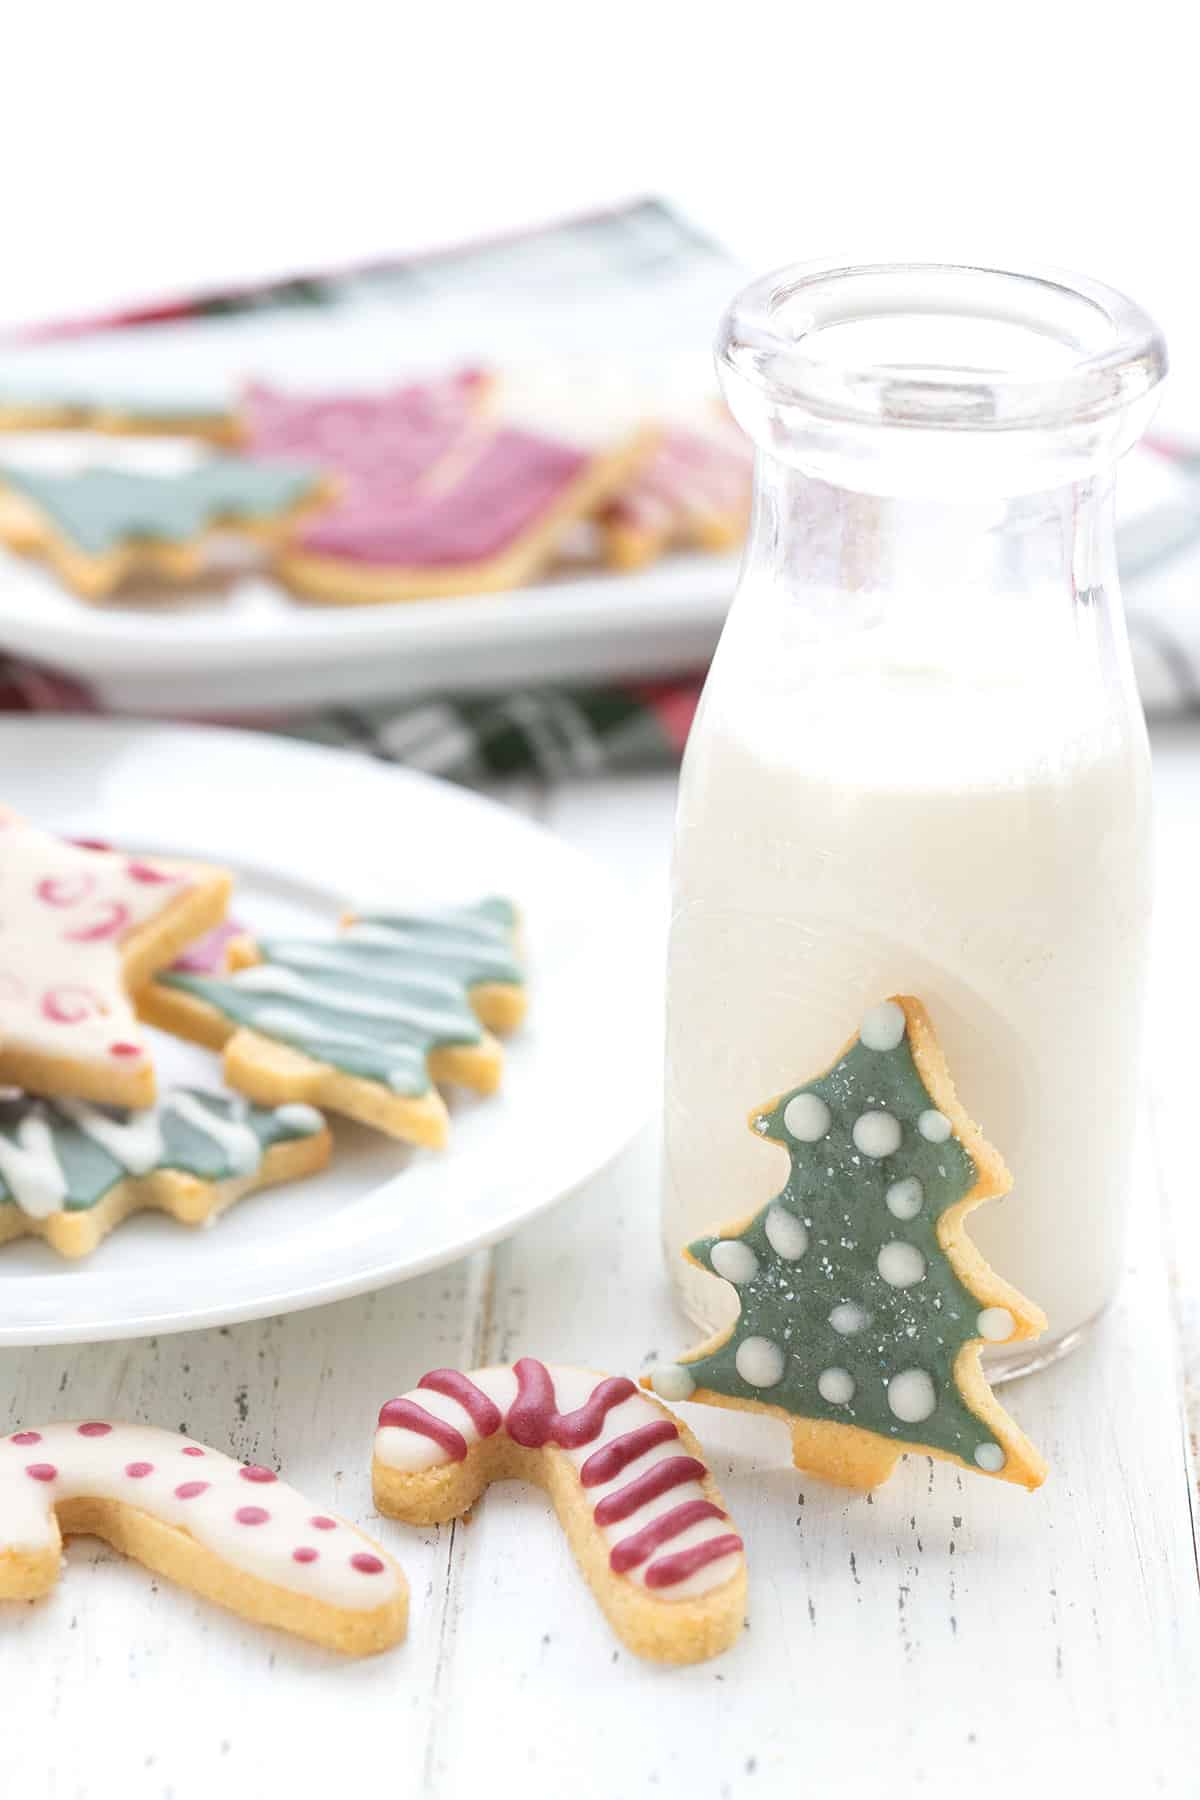 Keto sugar cookies on a table with a glass of milk.